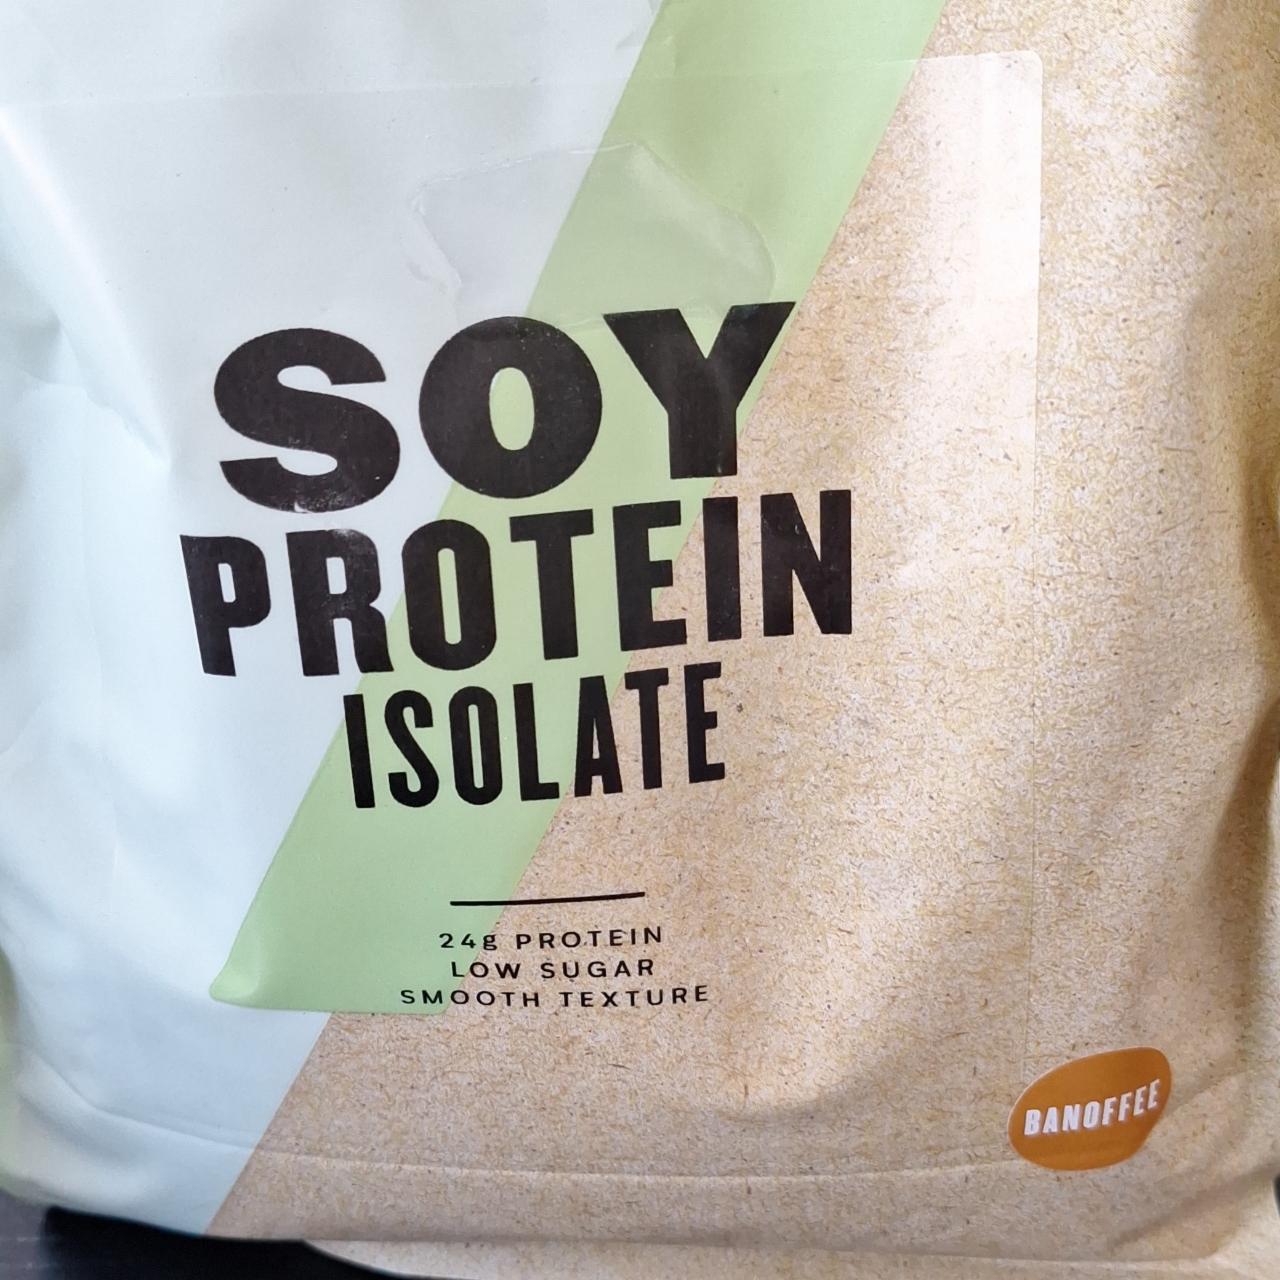 Fotografie - Soy Protein Isolate Banoffee MyProtein